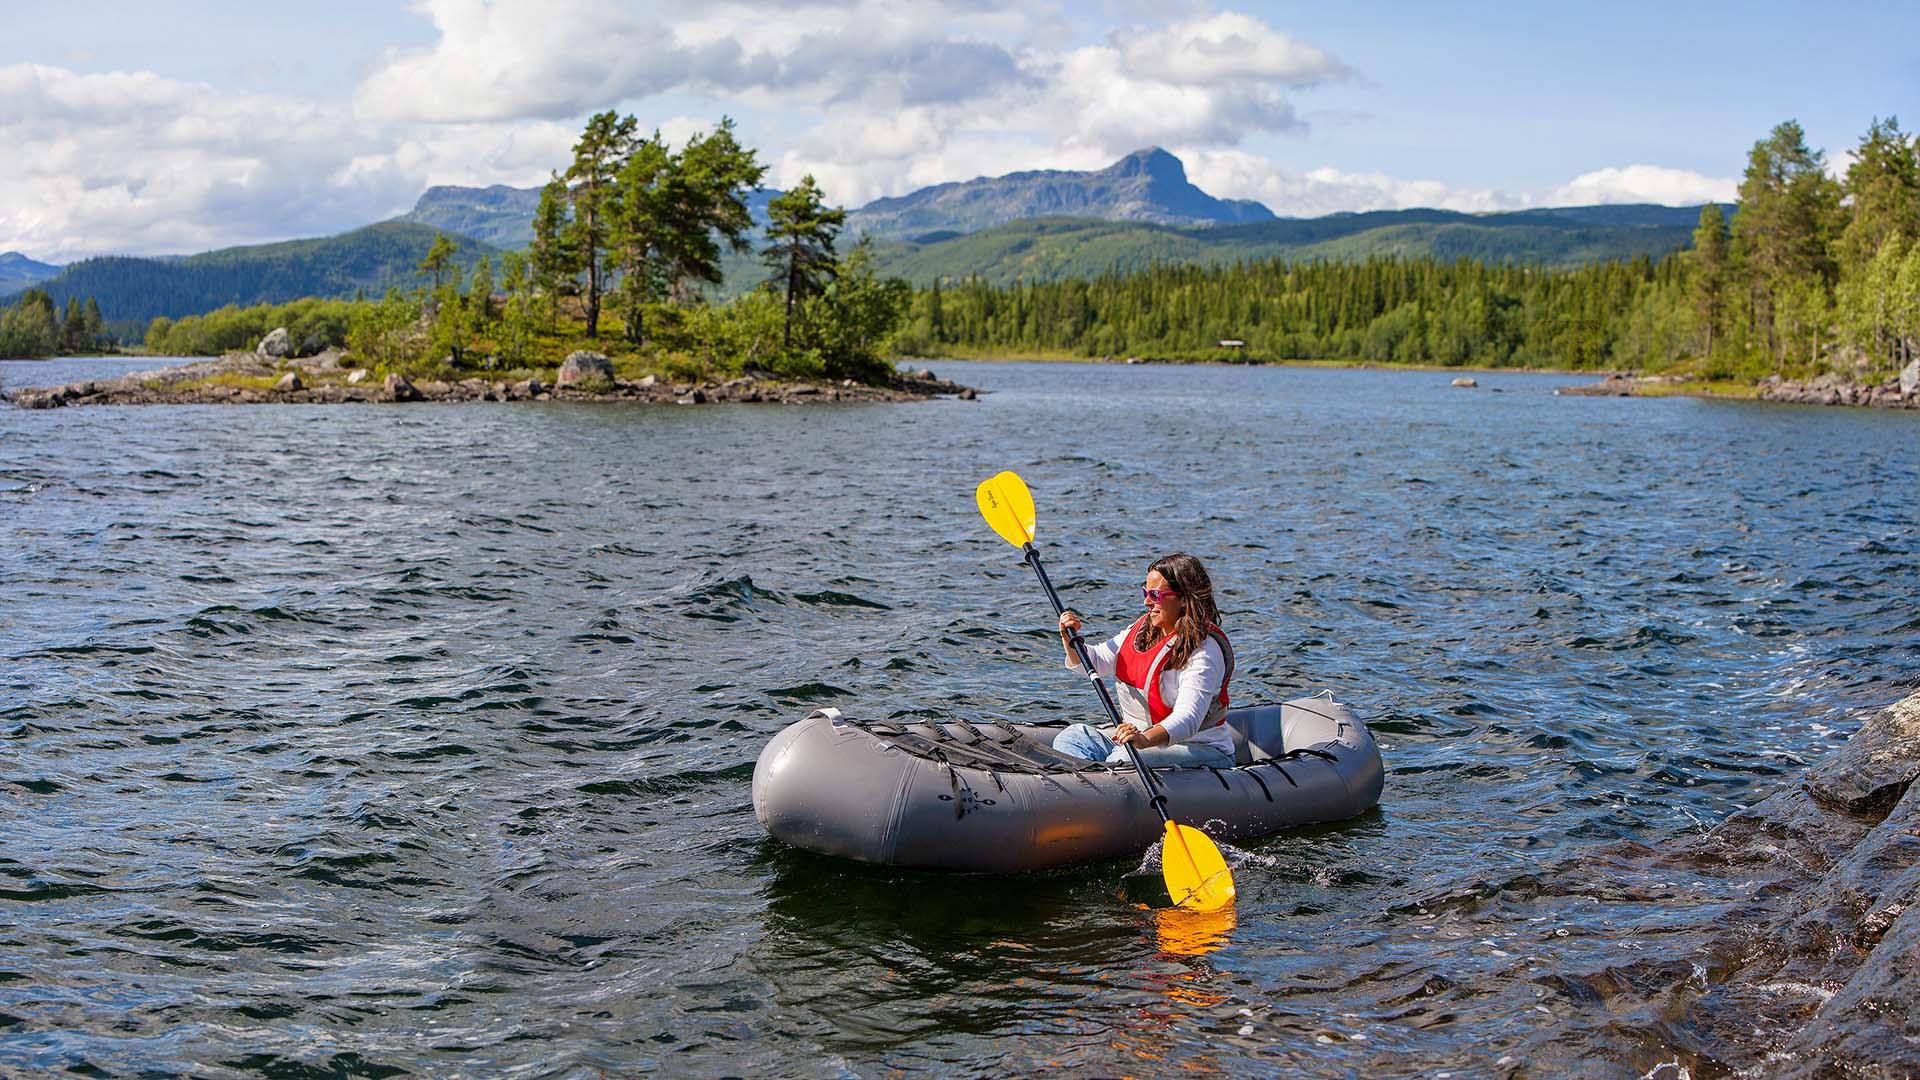 A person in a packraft with yellow paddles on a mopuntain lake. A small island with pine trees and a mountain in the background.